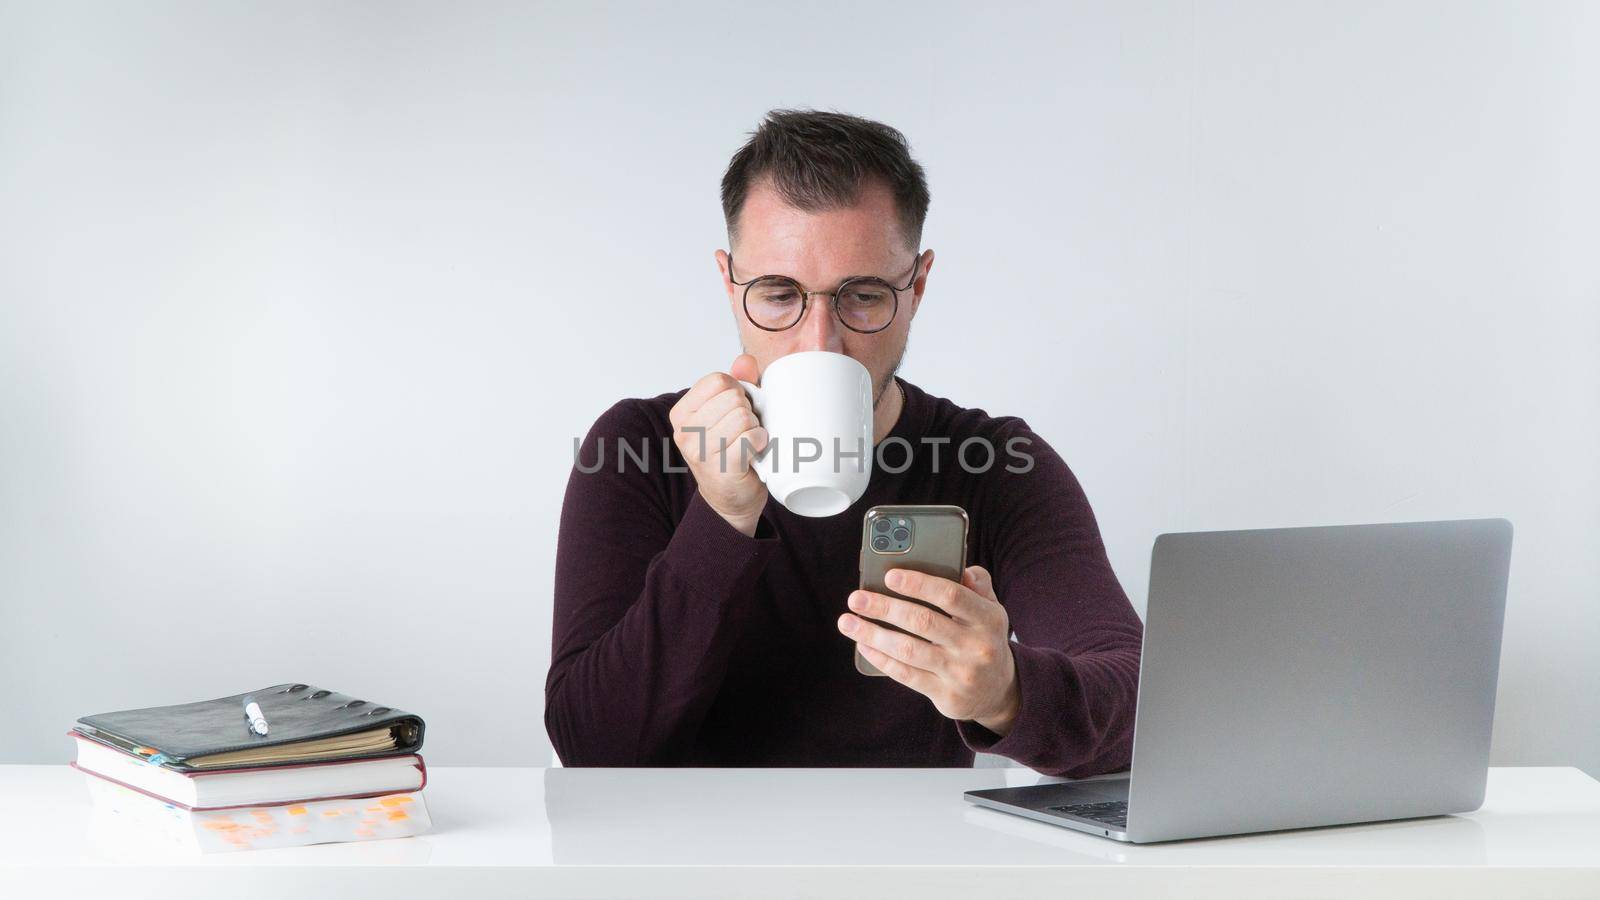 A man at work drinks coffee and looks at a smartphone. High quality photo